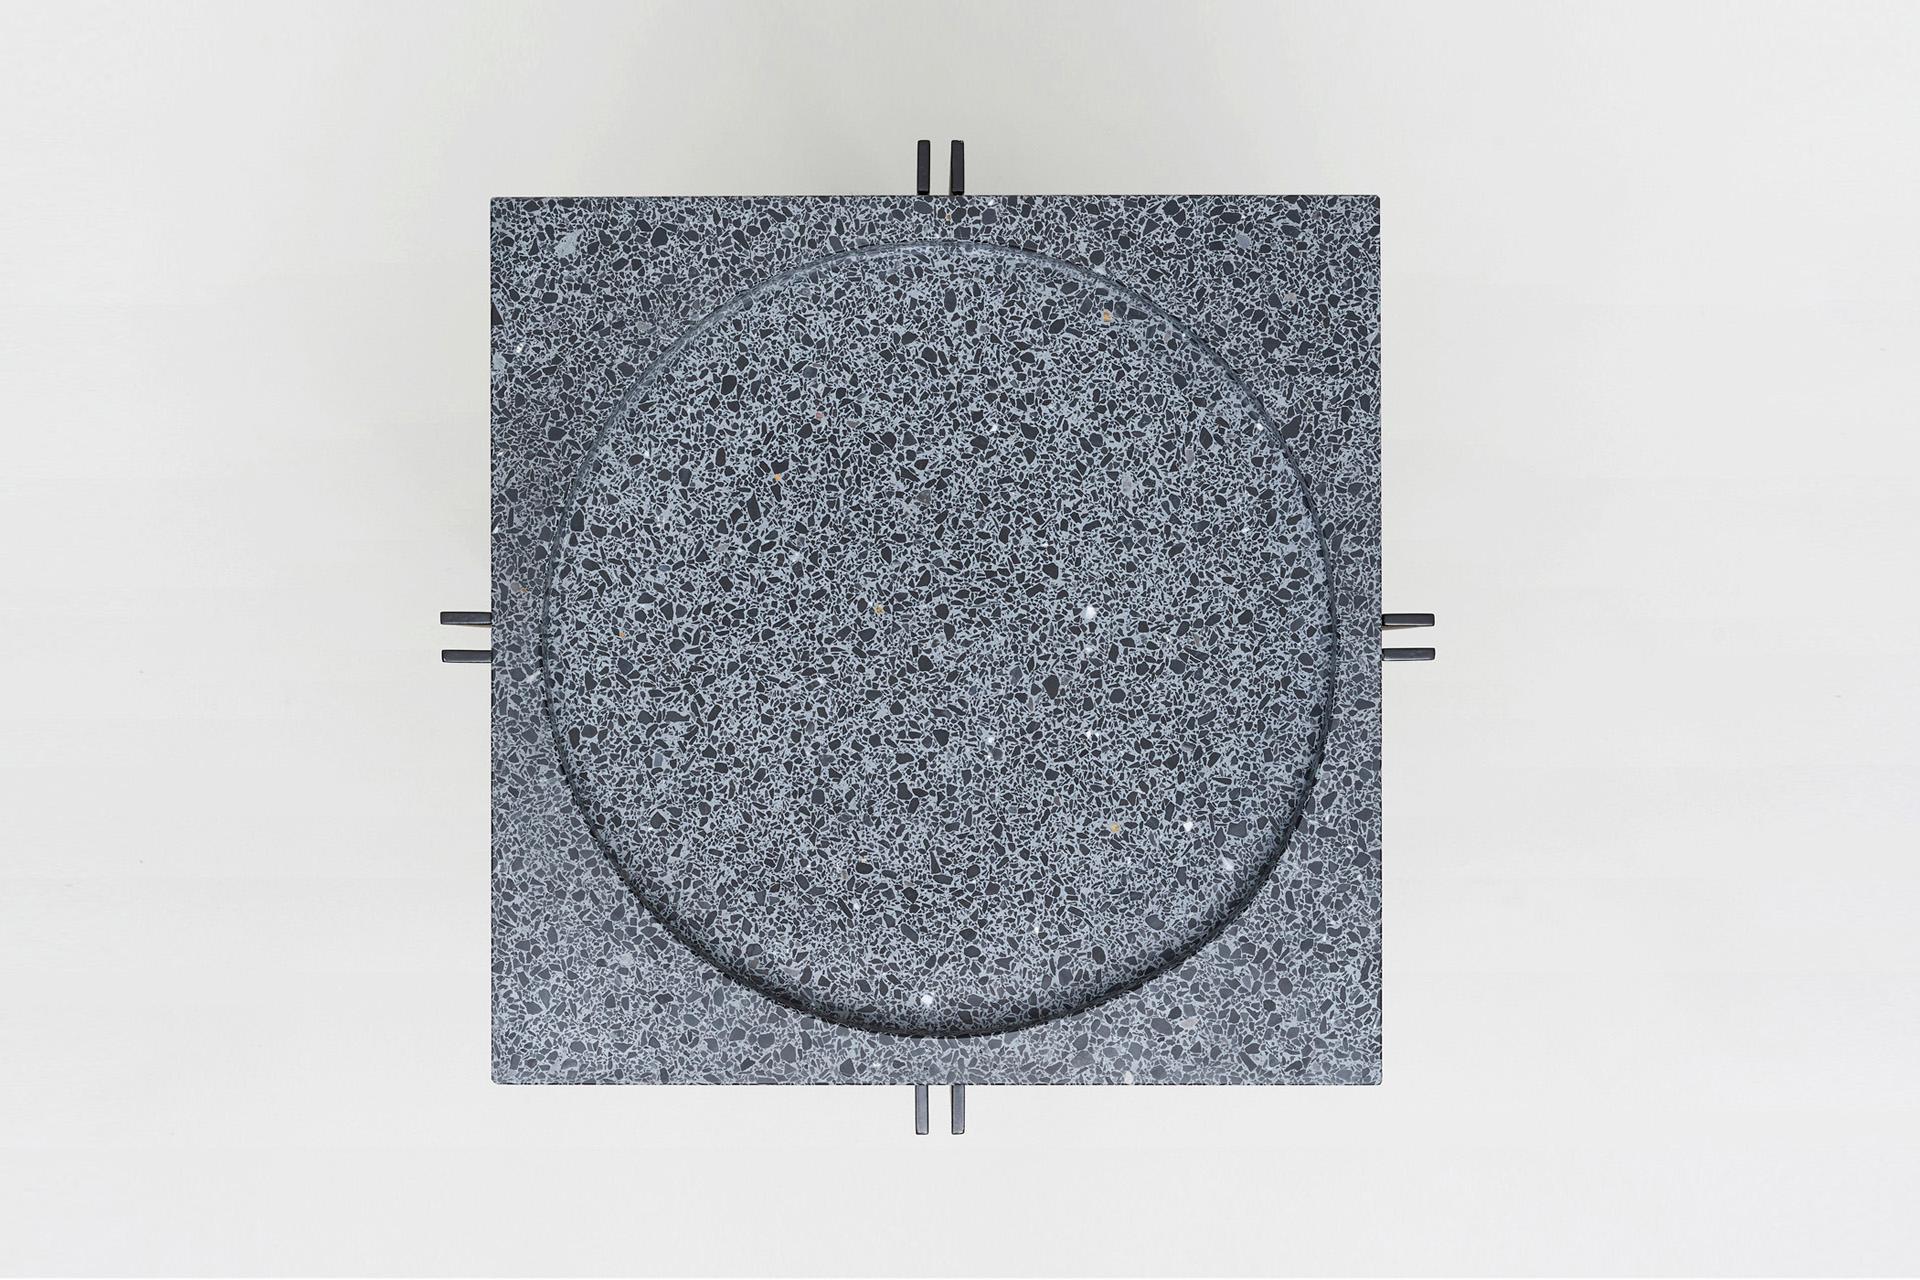 The form of our parallel bowl is extruded in this piece to create the parallel side table.

A terrazzo slab, with a circular recess for the top, nestles into a steel base.

Dimensions: 440 L x 440 W x 550 H

Materials: 2pac black steel base with